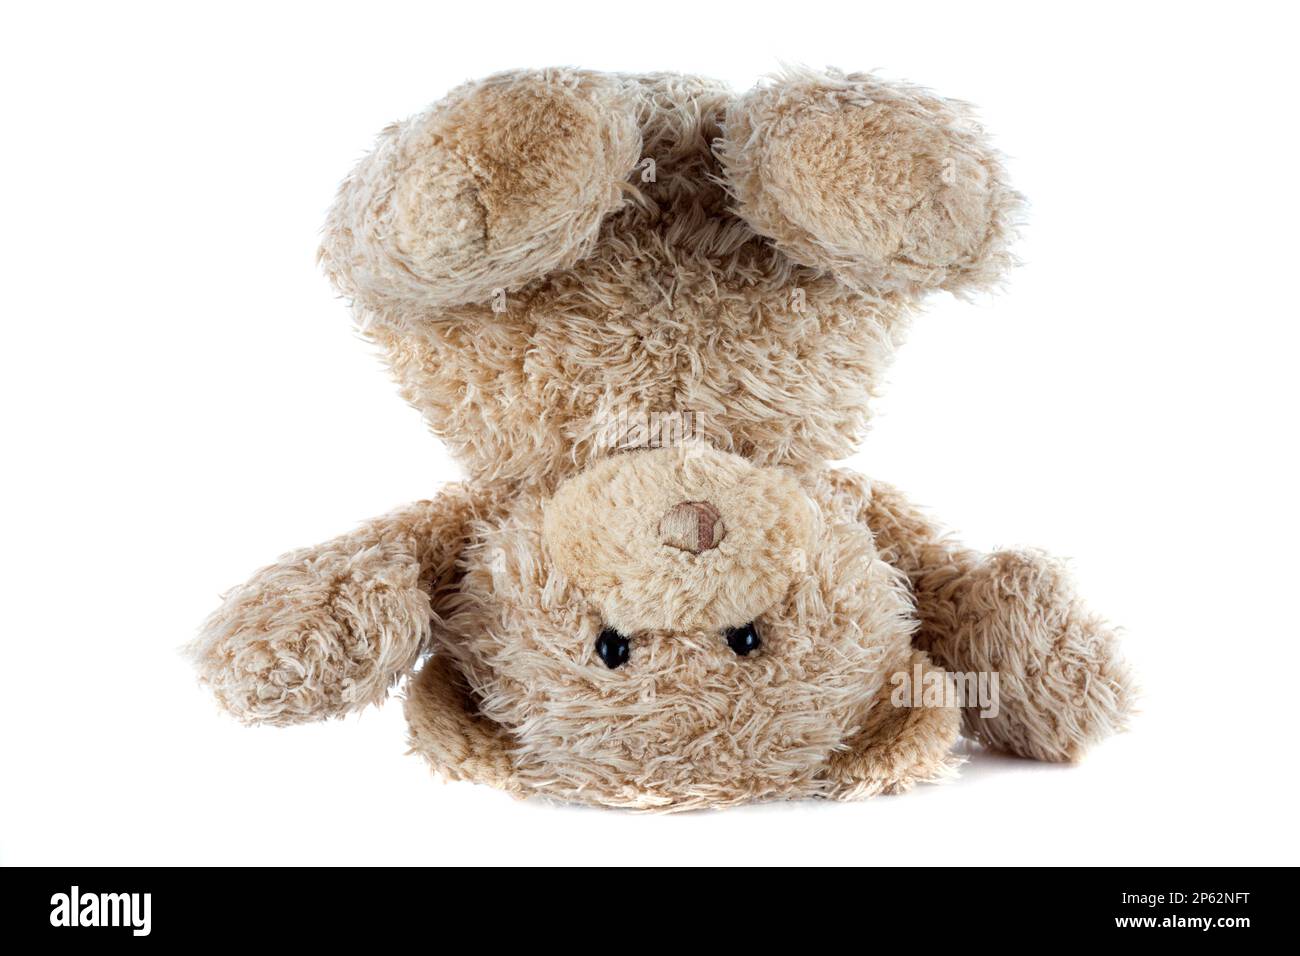 Funny Teddy Bear turned upside down isolated on white background Stock Photo